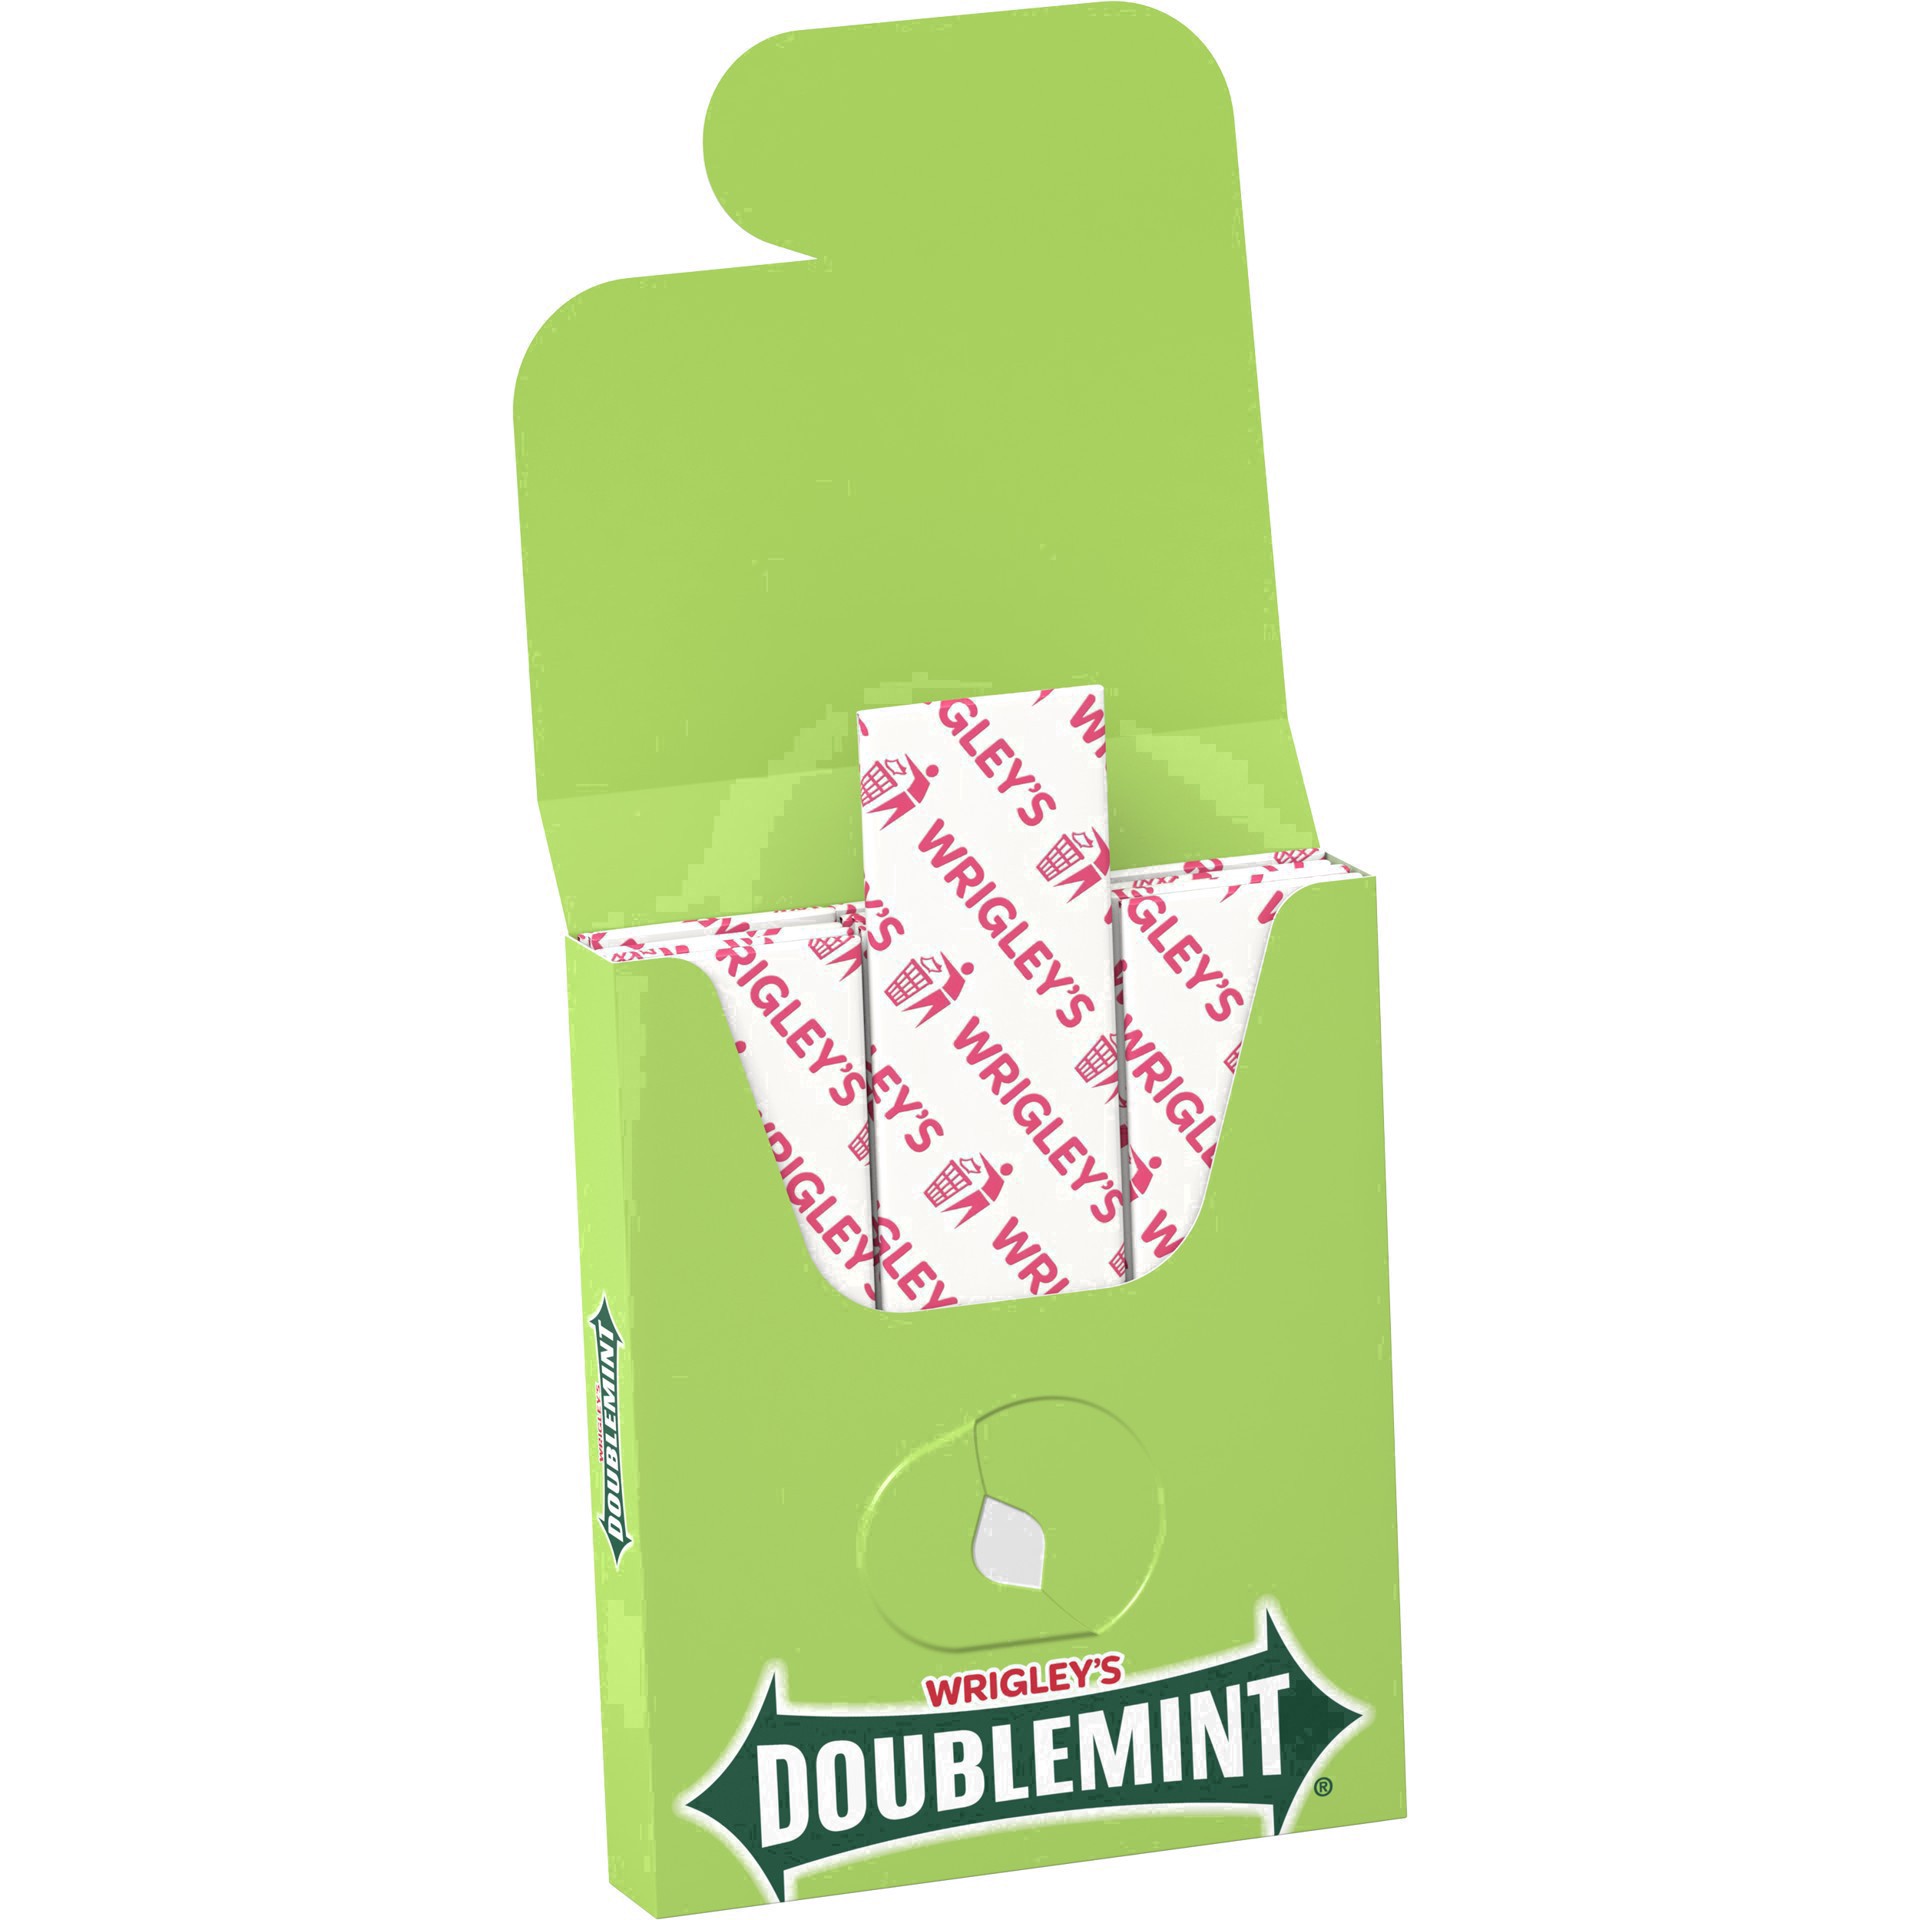 slide 106 of 134, Doublemint WRIGLEY'S DOUBLEMINT Bulk Chewing Gum, Value Pack, 15 ct (3 Pack), 45 ct